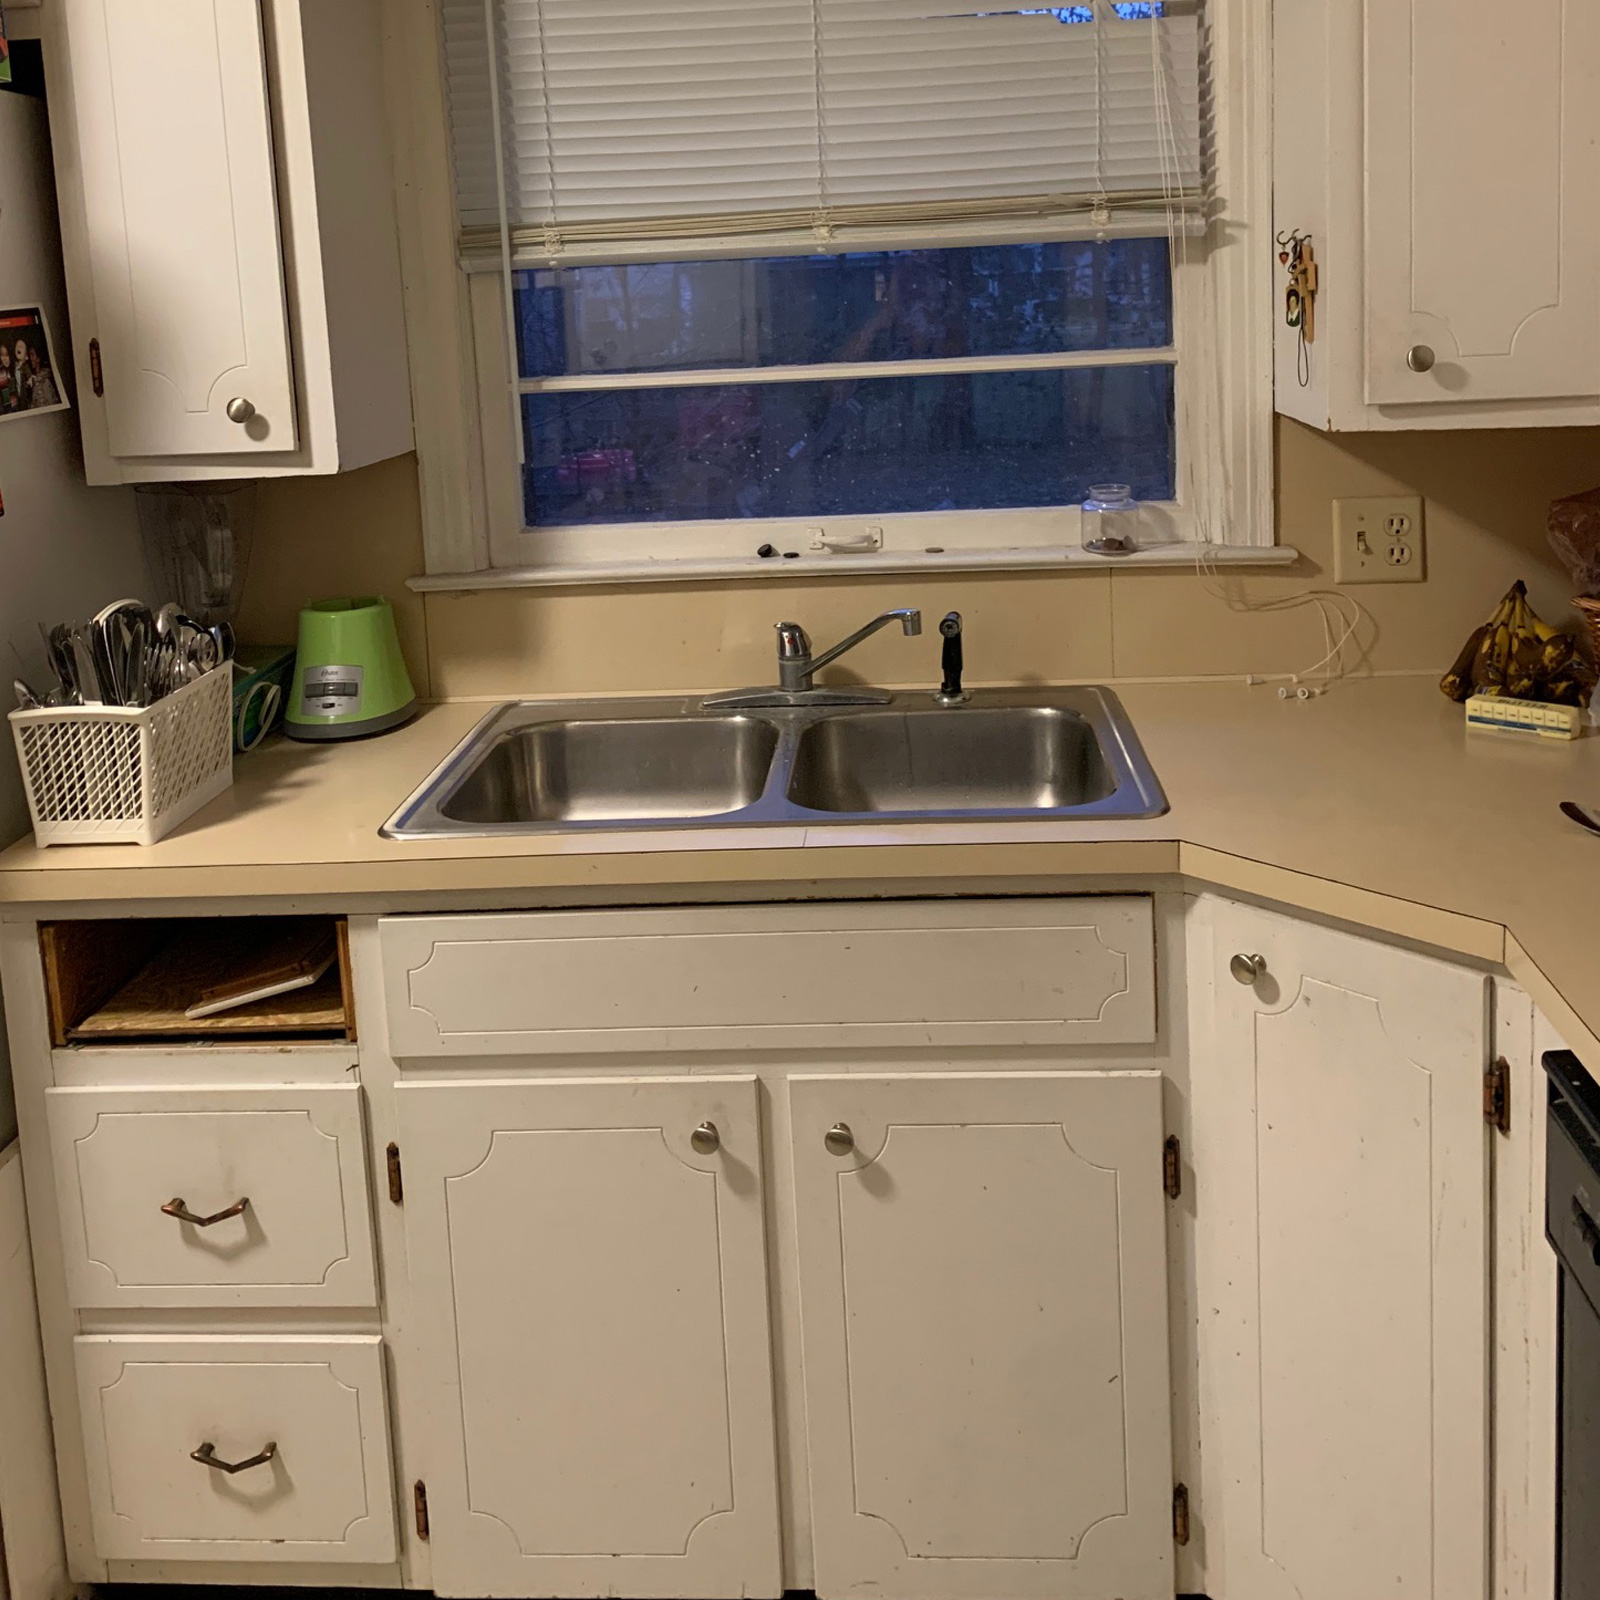 Entry 164 - Boring color scheme and outdated cabinets make for a tired kitchen